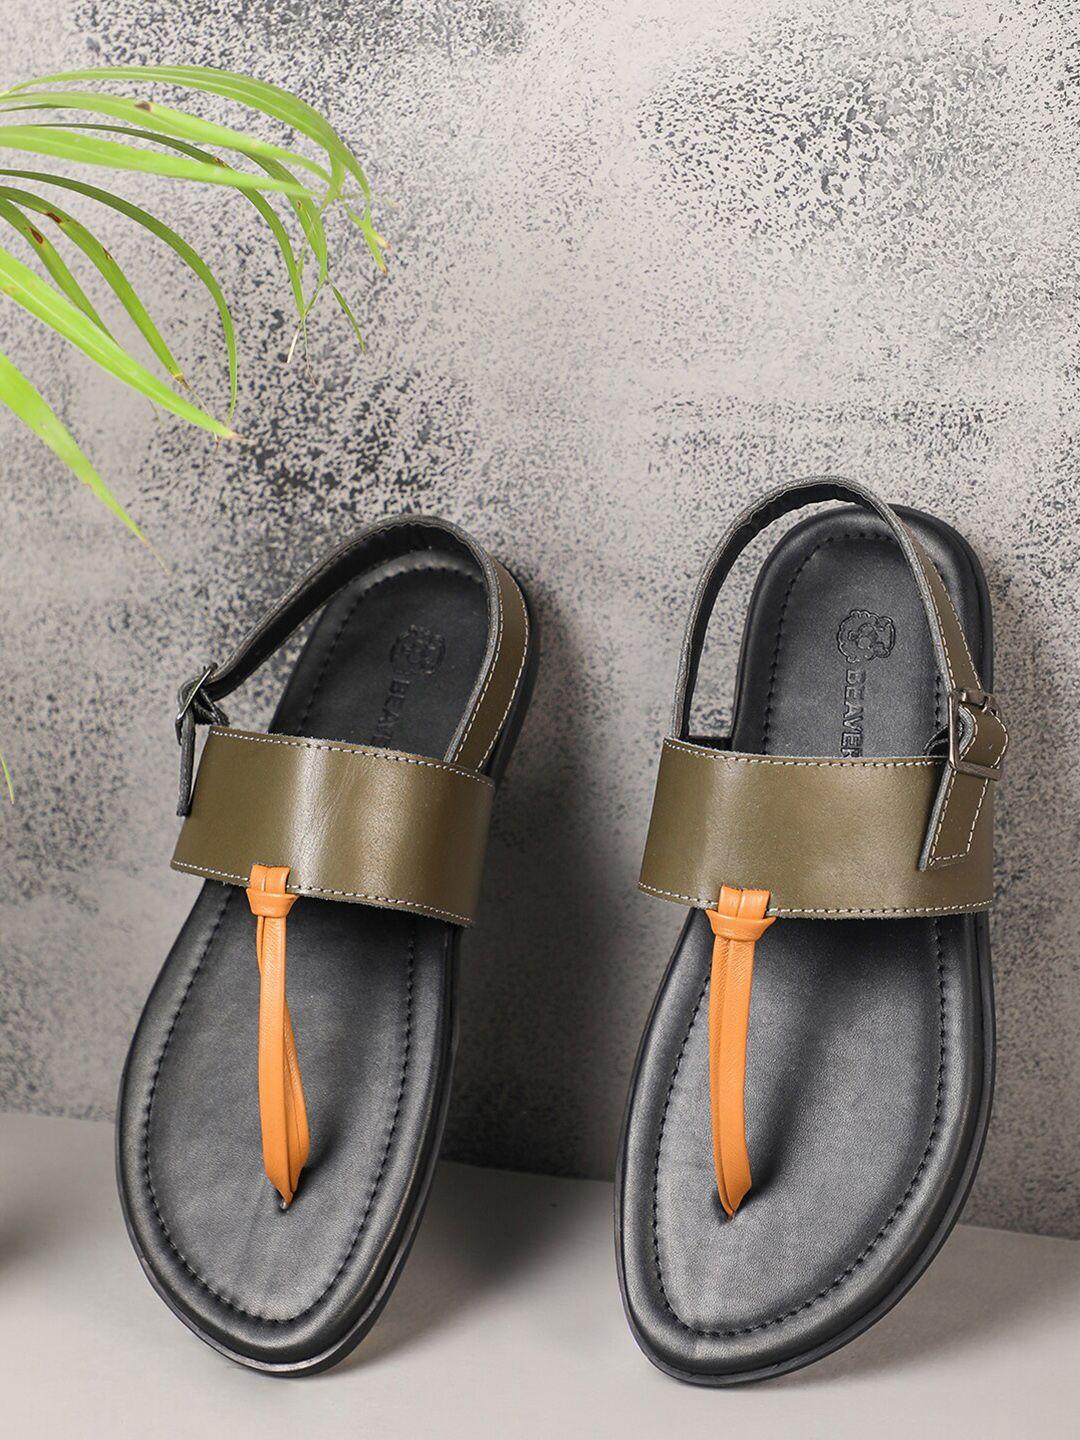 beaver men open toe leather comfort sandals with buckle detail